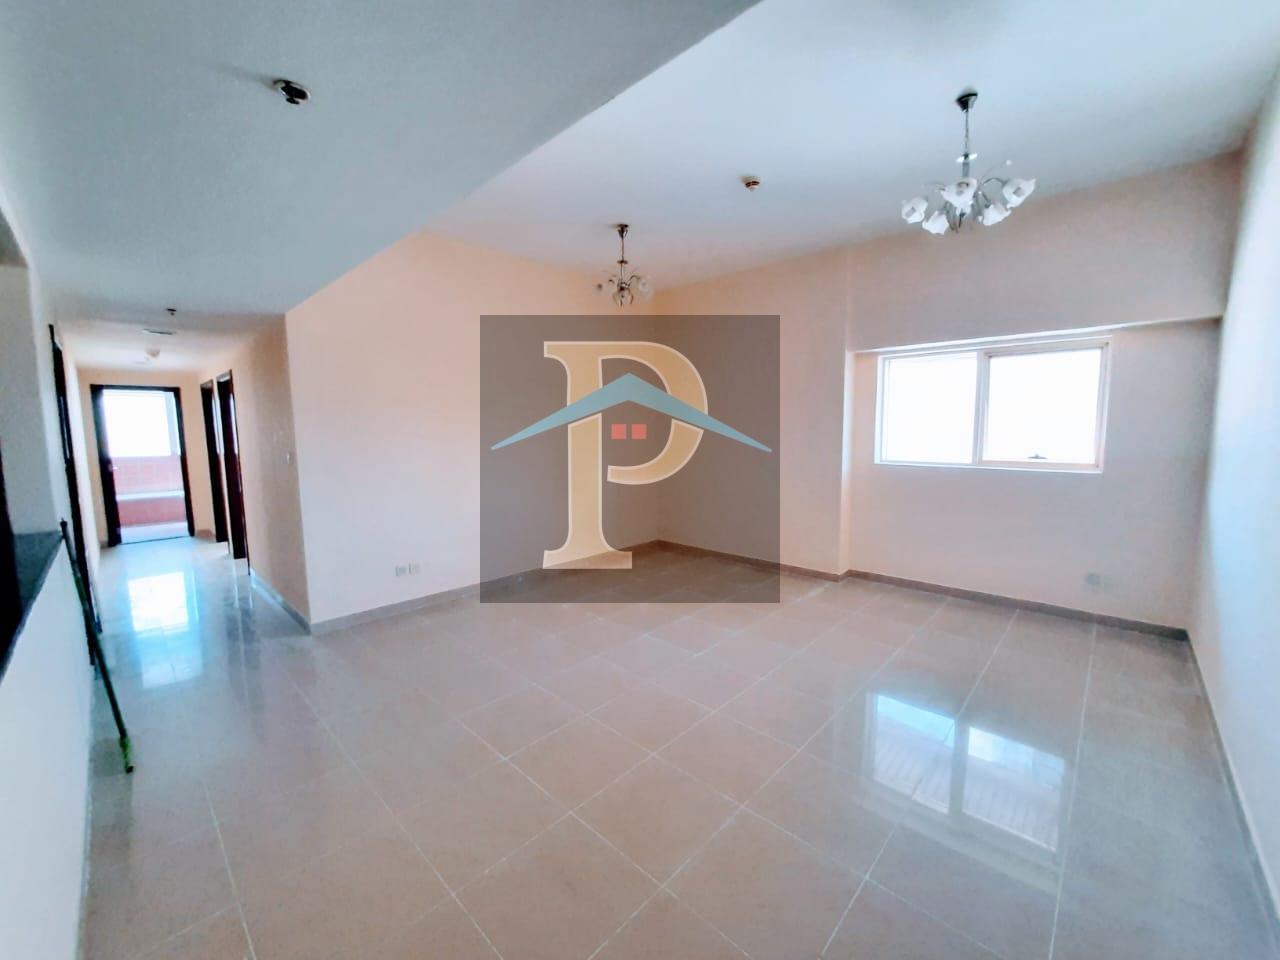 2 bed, 3 bath Hotel & Hotel Apartment for rent in Al Dana Tower, Al Wahda, Abu Dhabi for price AED 60000 yearly 